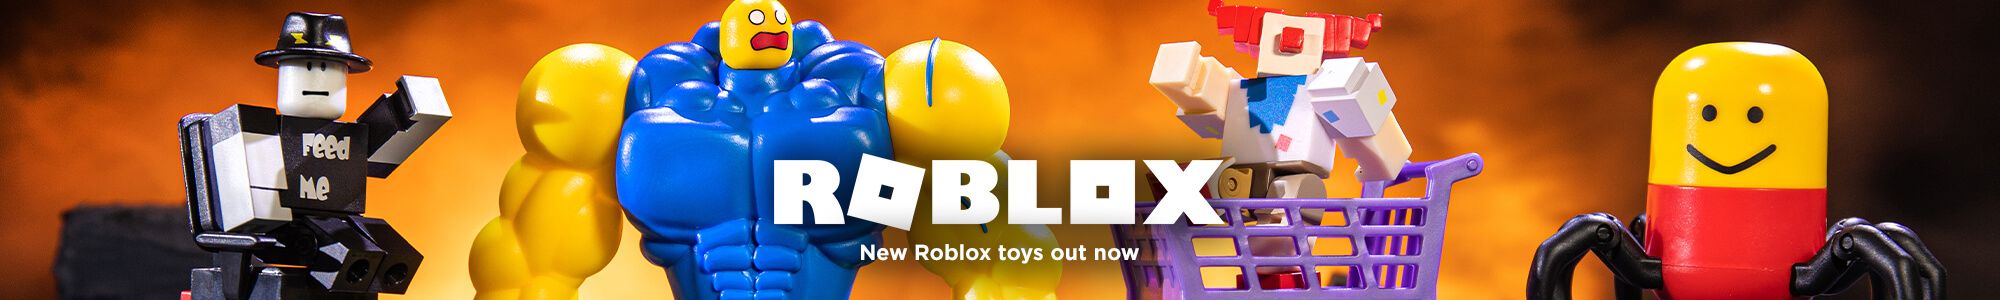 Roblox Roblox Toys Figures The Entertainer - roblox chillthrill toy